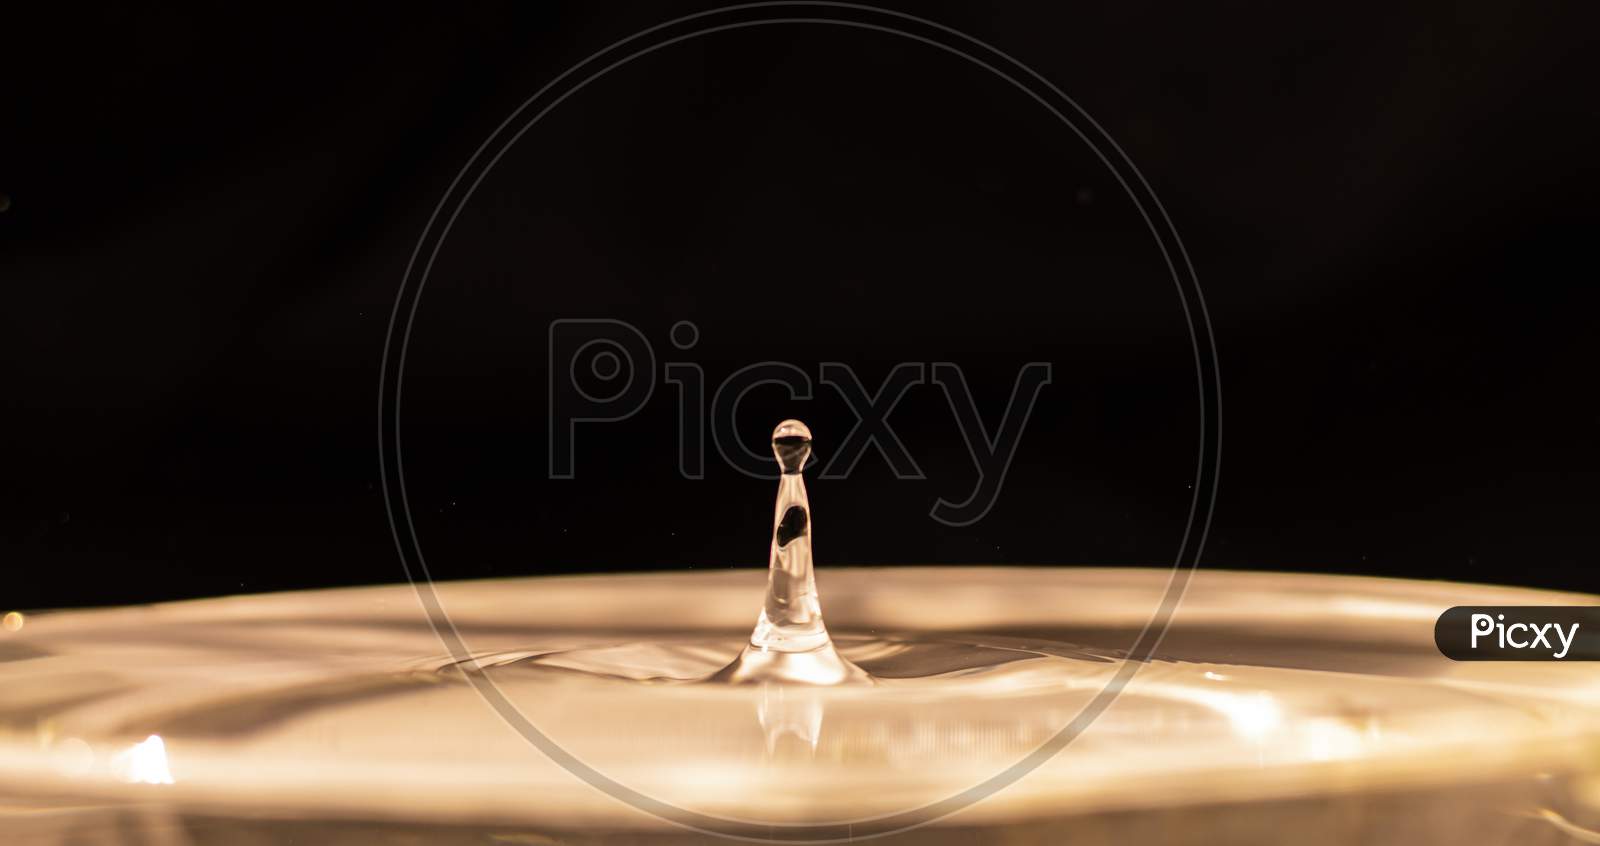 Water Droplet Rises After Falling On Black Background